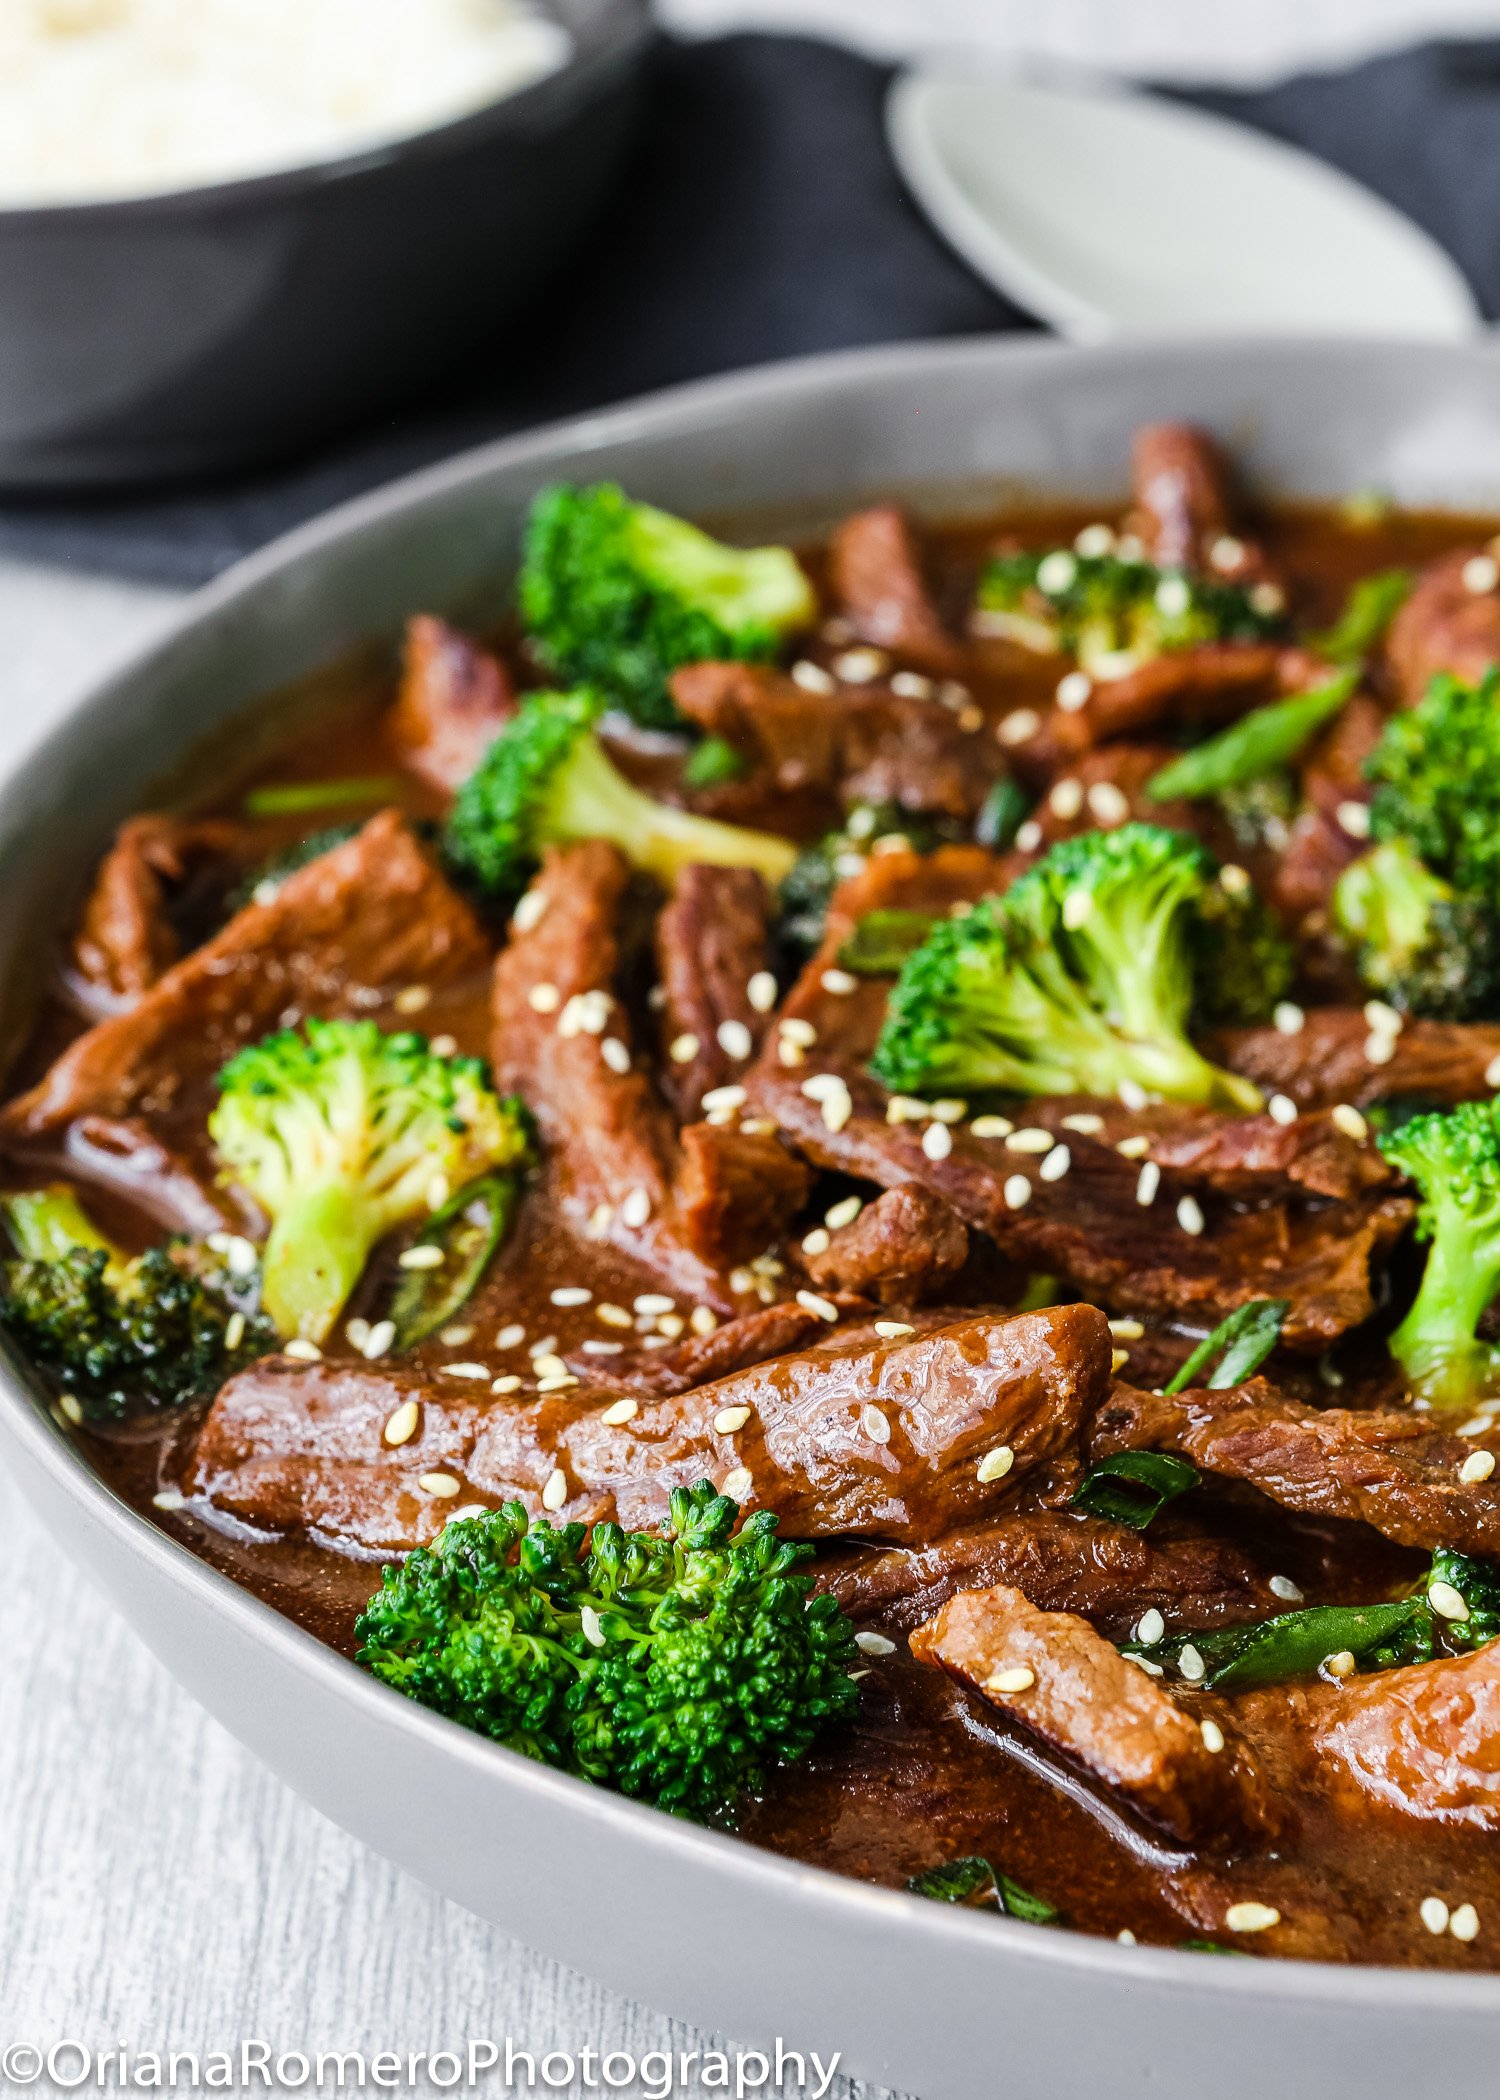 Beef and broccoli stir fry garnished with sesame seed in a serving bowl.